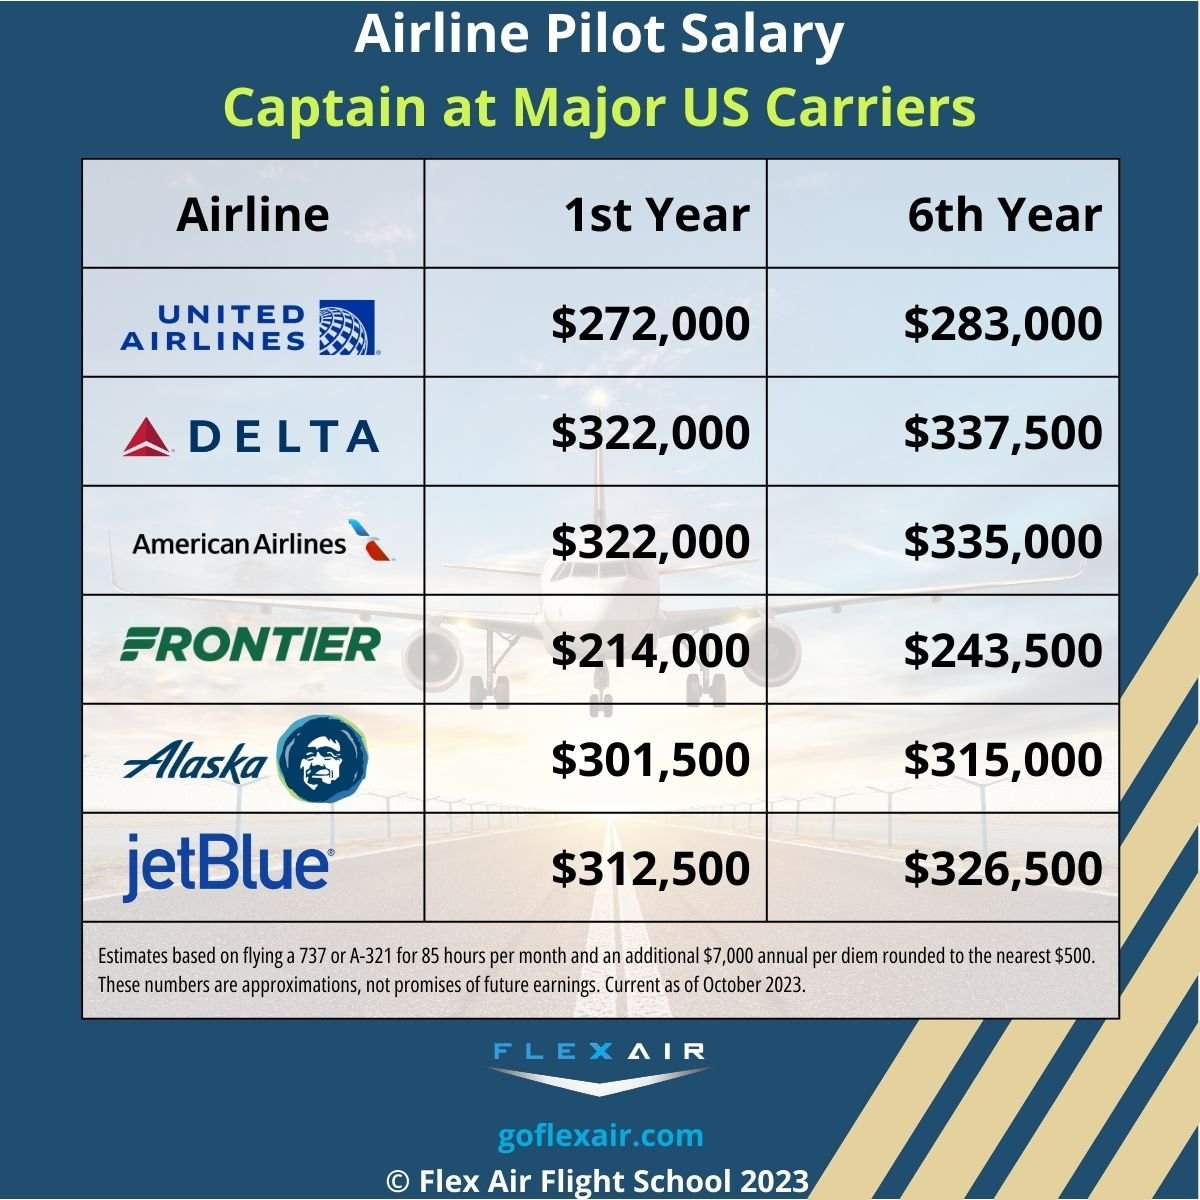 Airline Pilot Salary Captain at Major US Carriers